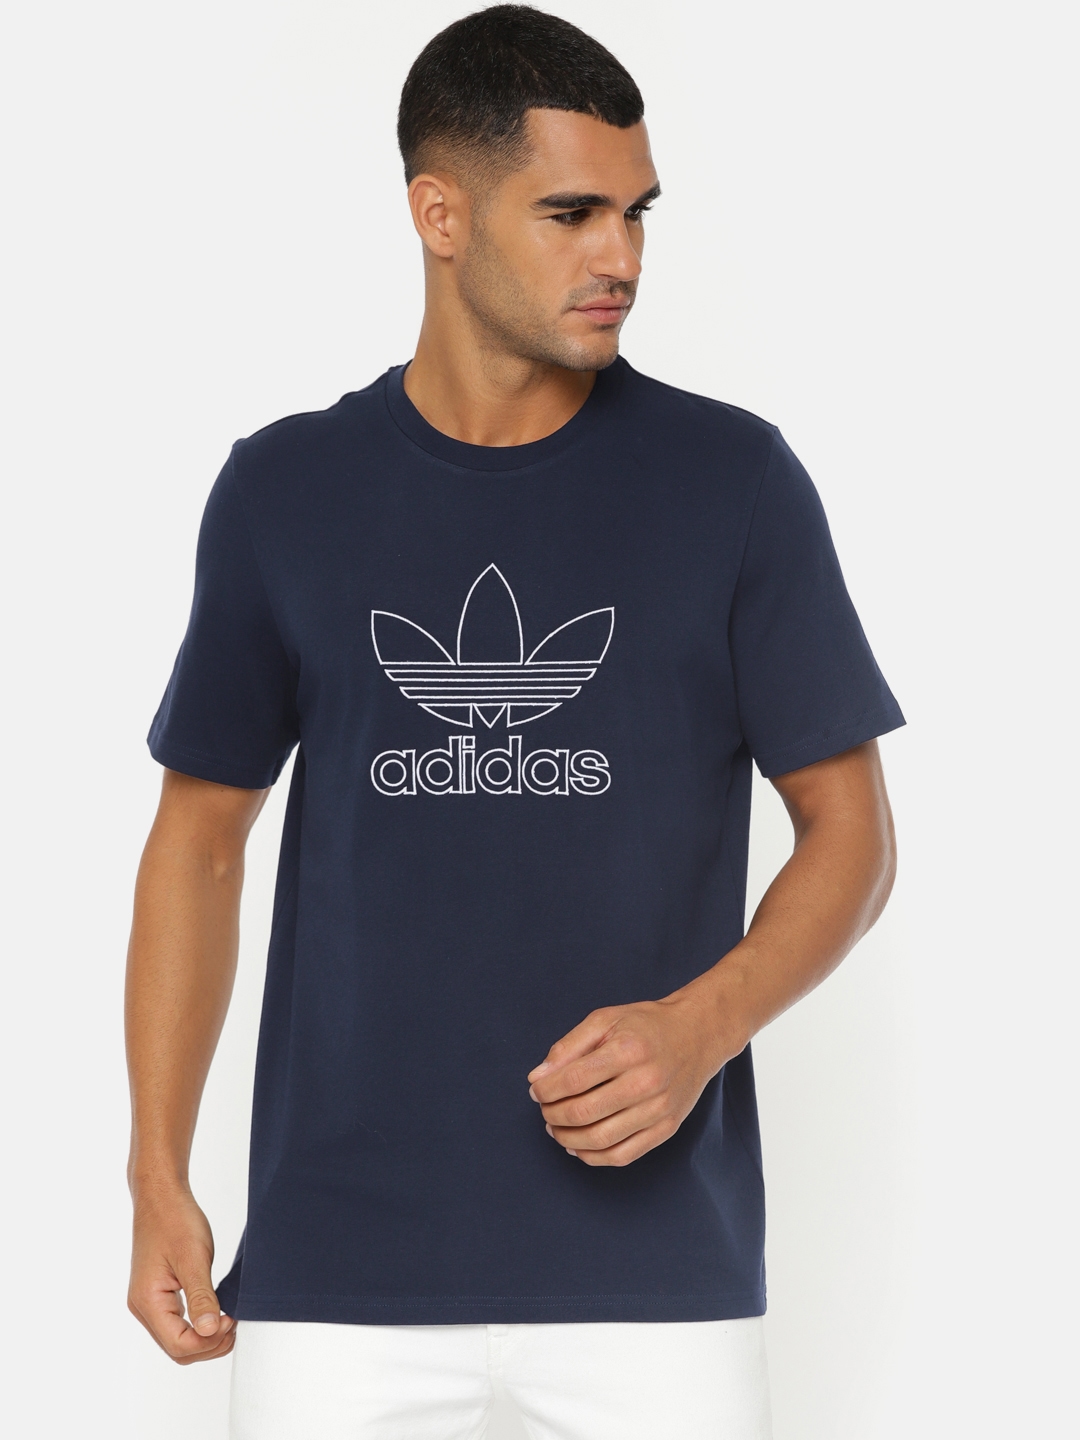 Buy > adidas outline t shirt > in stock